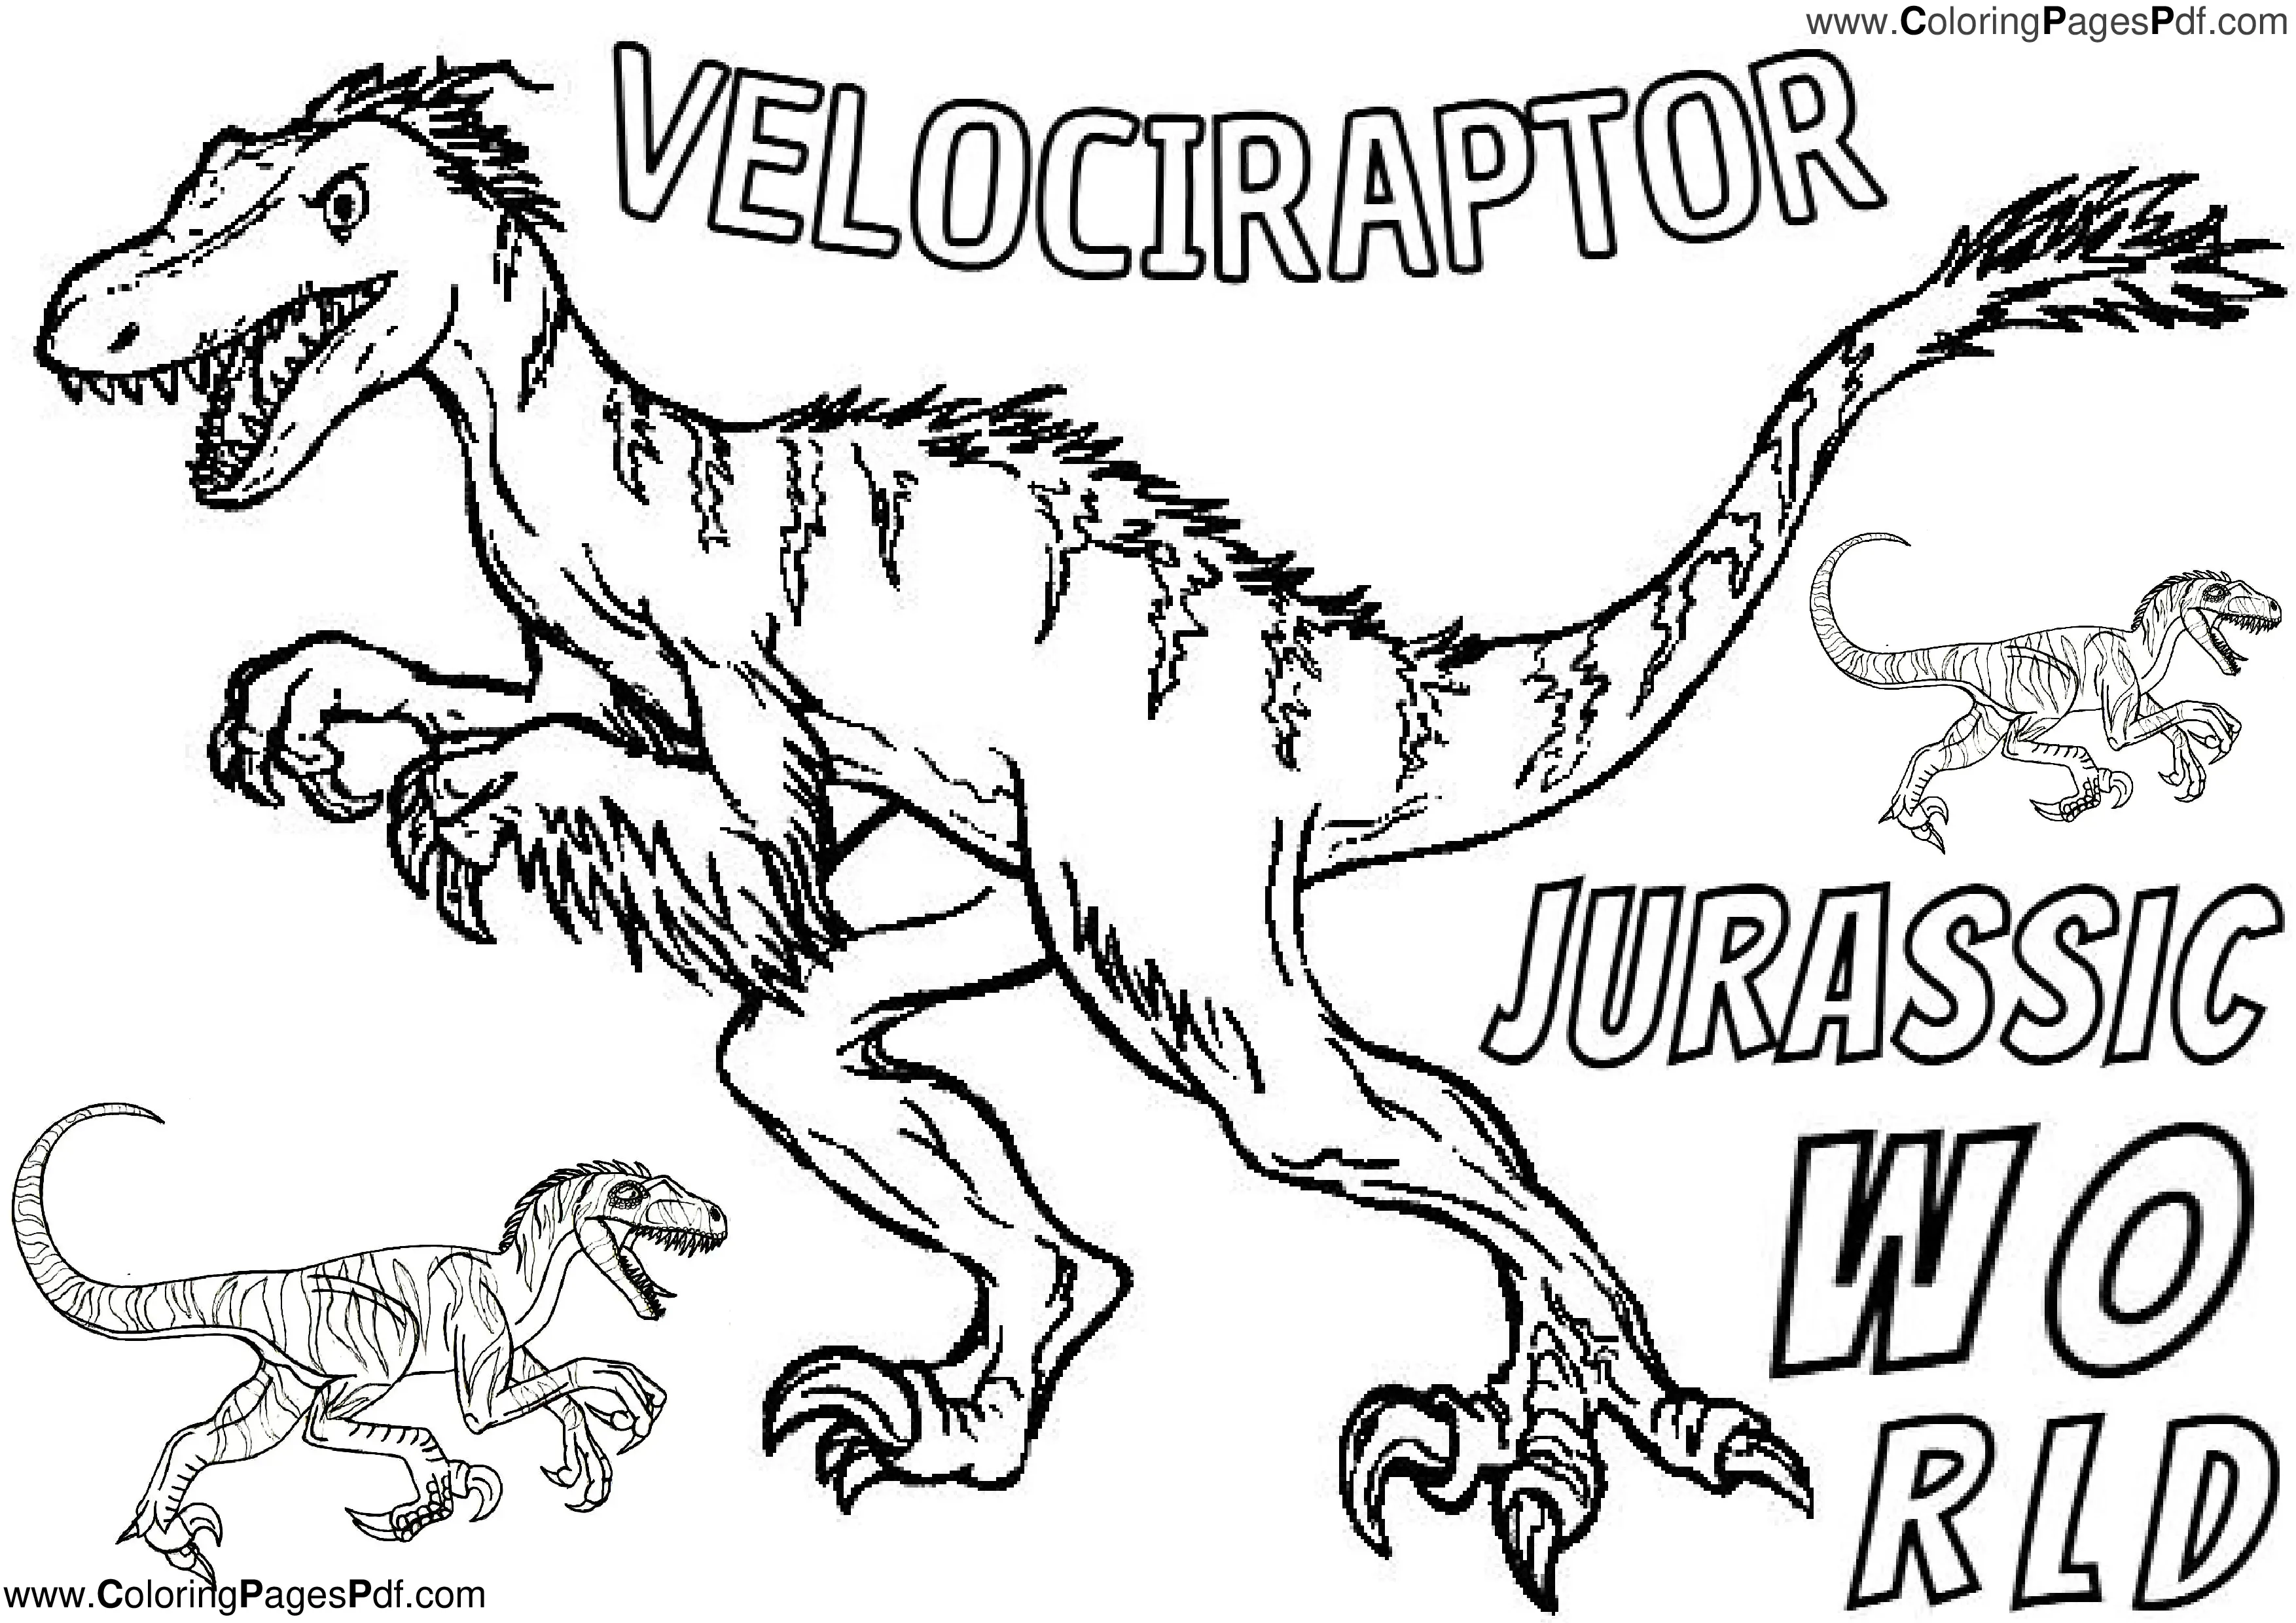 Jurassic world coloring pages velociraptor